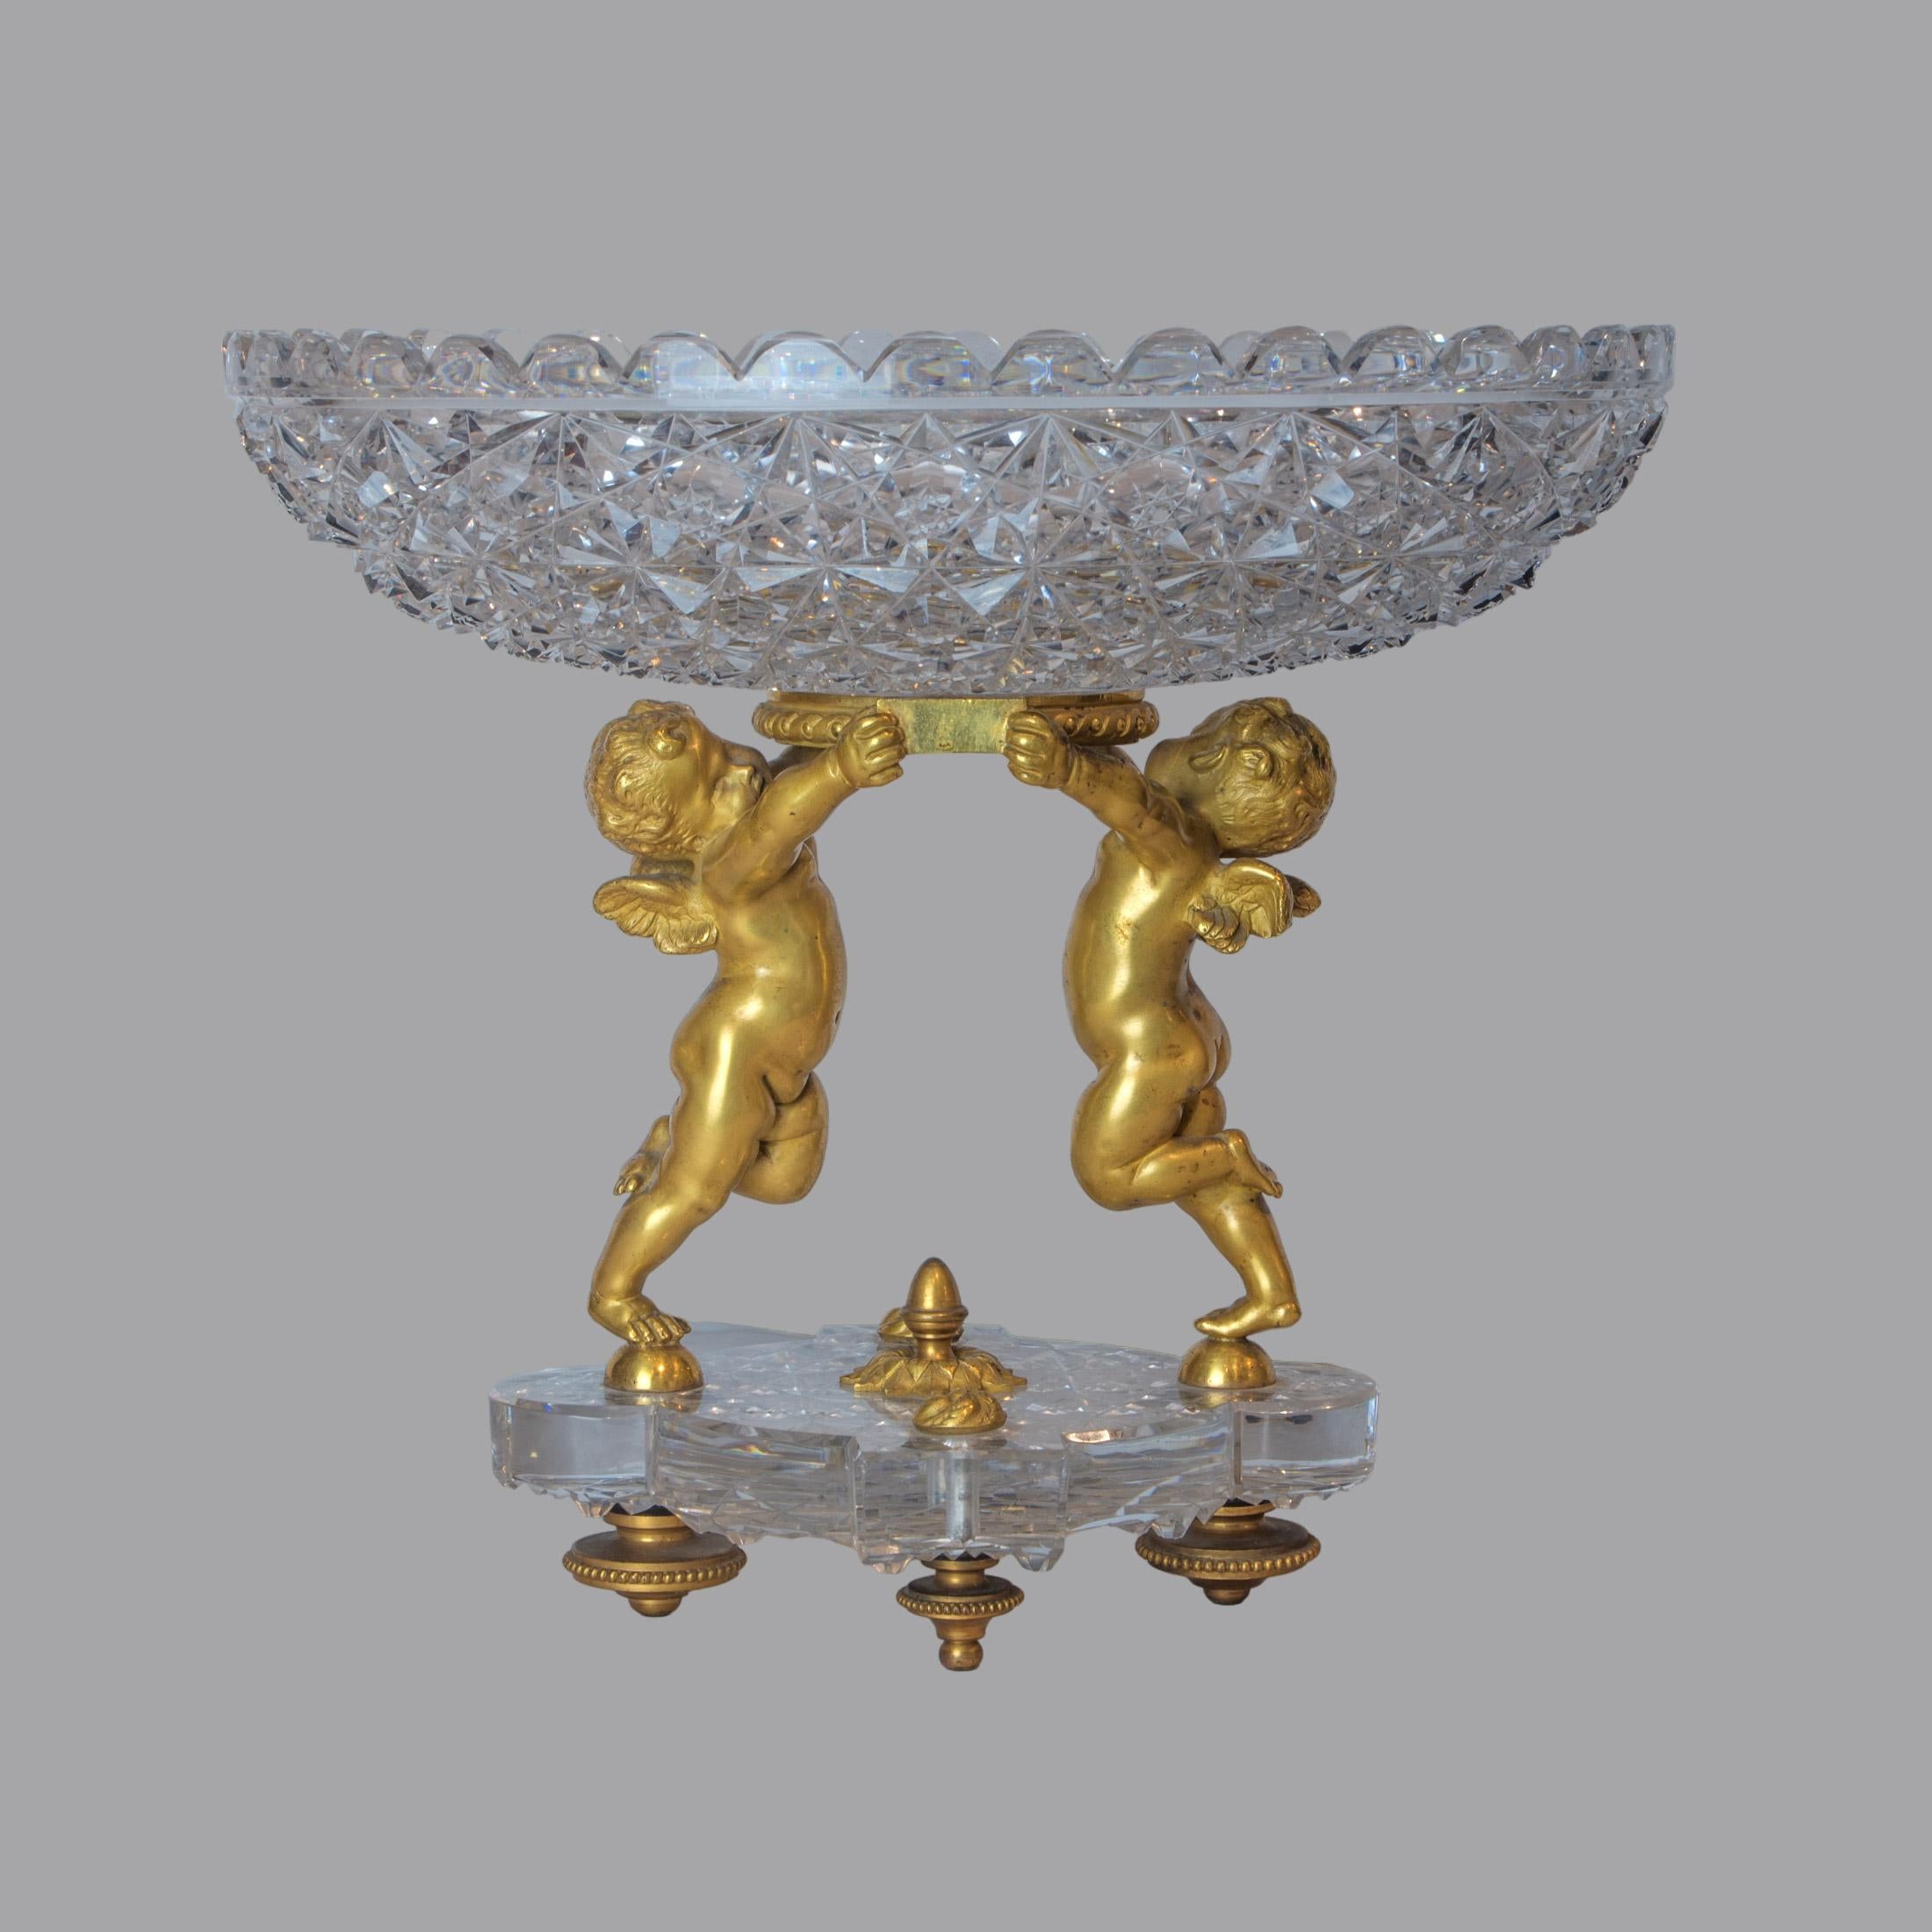 Highly  Important Baccarat 19th Century Cut Crystal and Ormolu Garniture For Sale 6